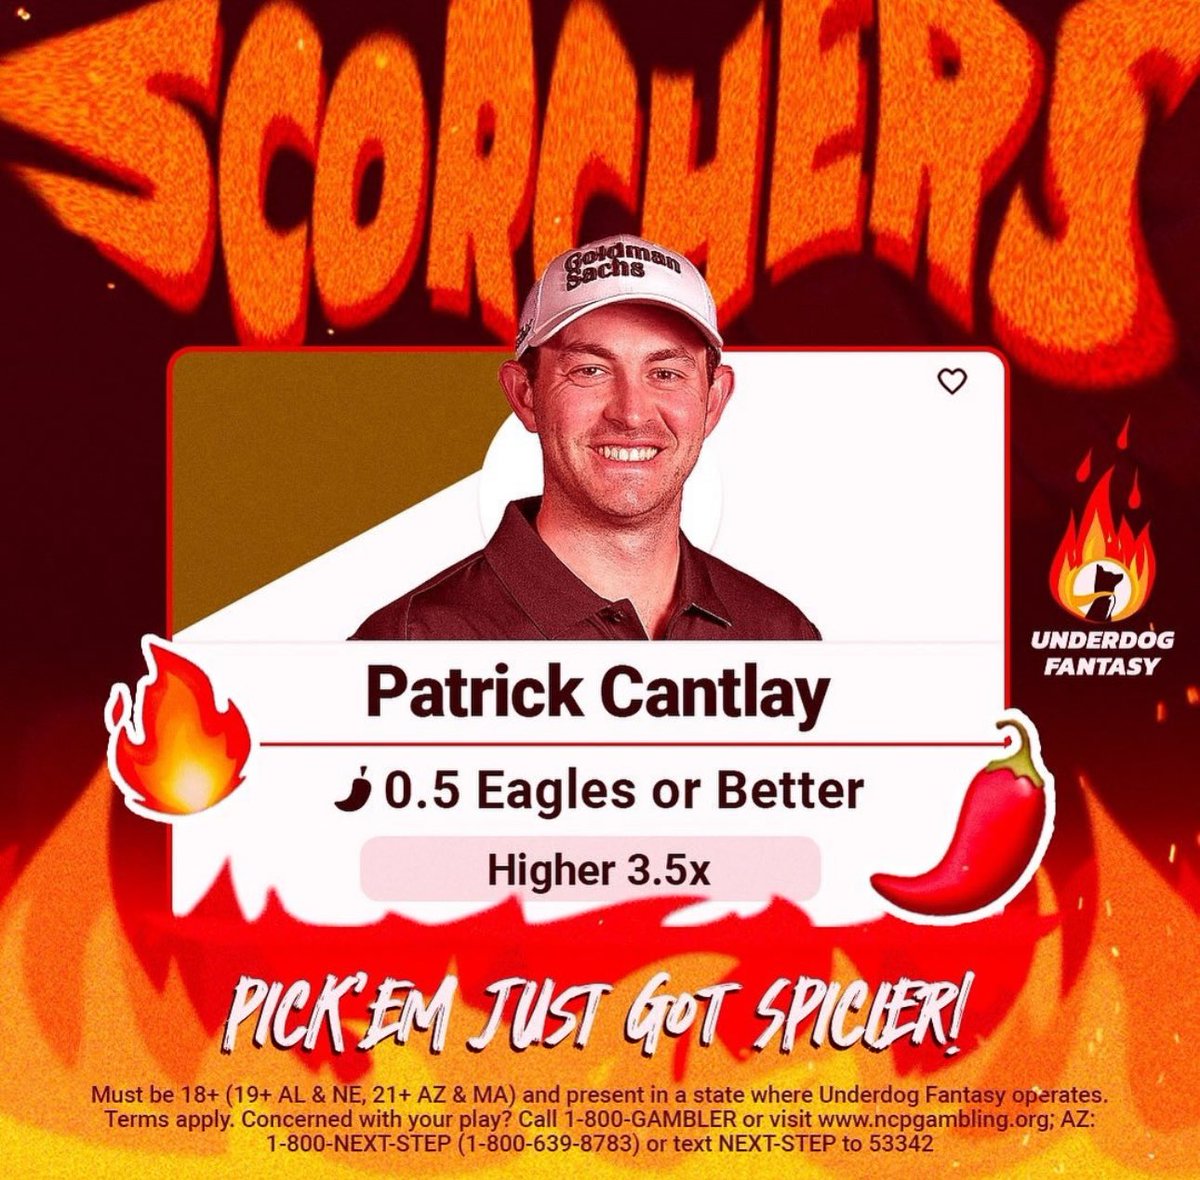 He eagled twice during #TheMasters 

Add his 0.5 Eagles or better Scorcher pick to your pick 5 entry at the #PGAChampionship for a 70x payout boost and use code “DrunkByTheTurn” for a 100% deposit match up to $250 on @UnderdogFantasy with your first deposit.